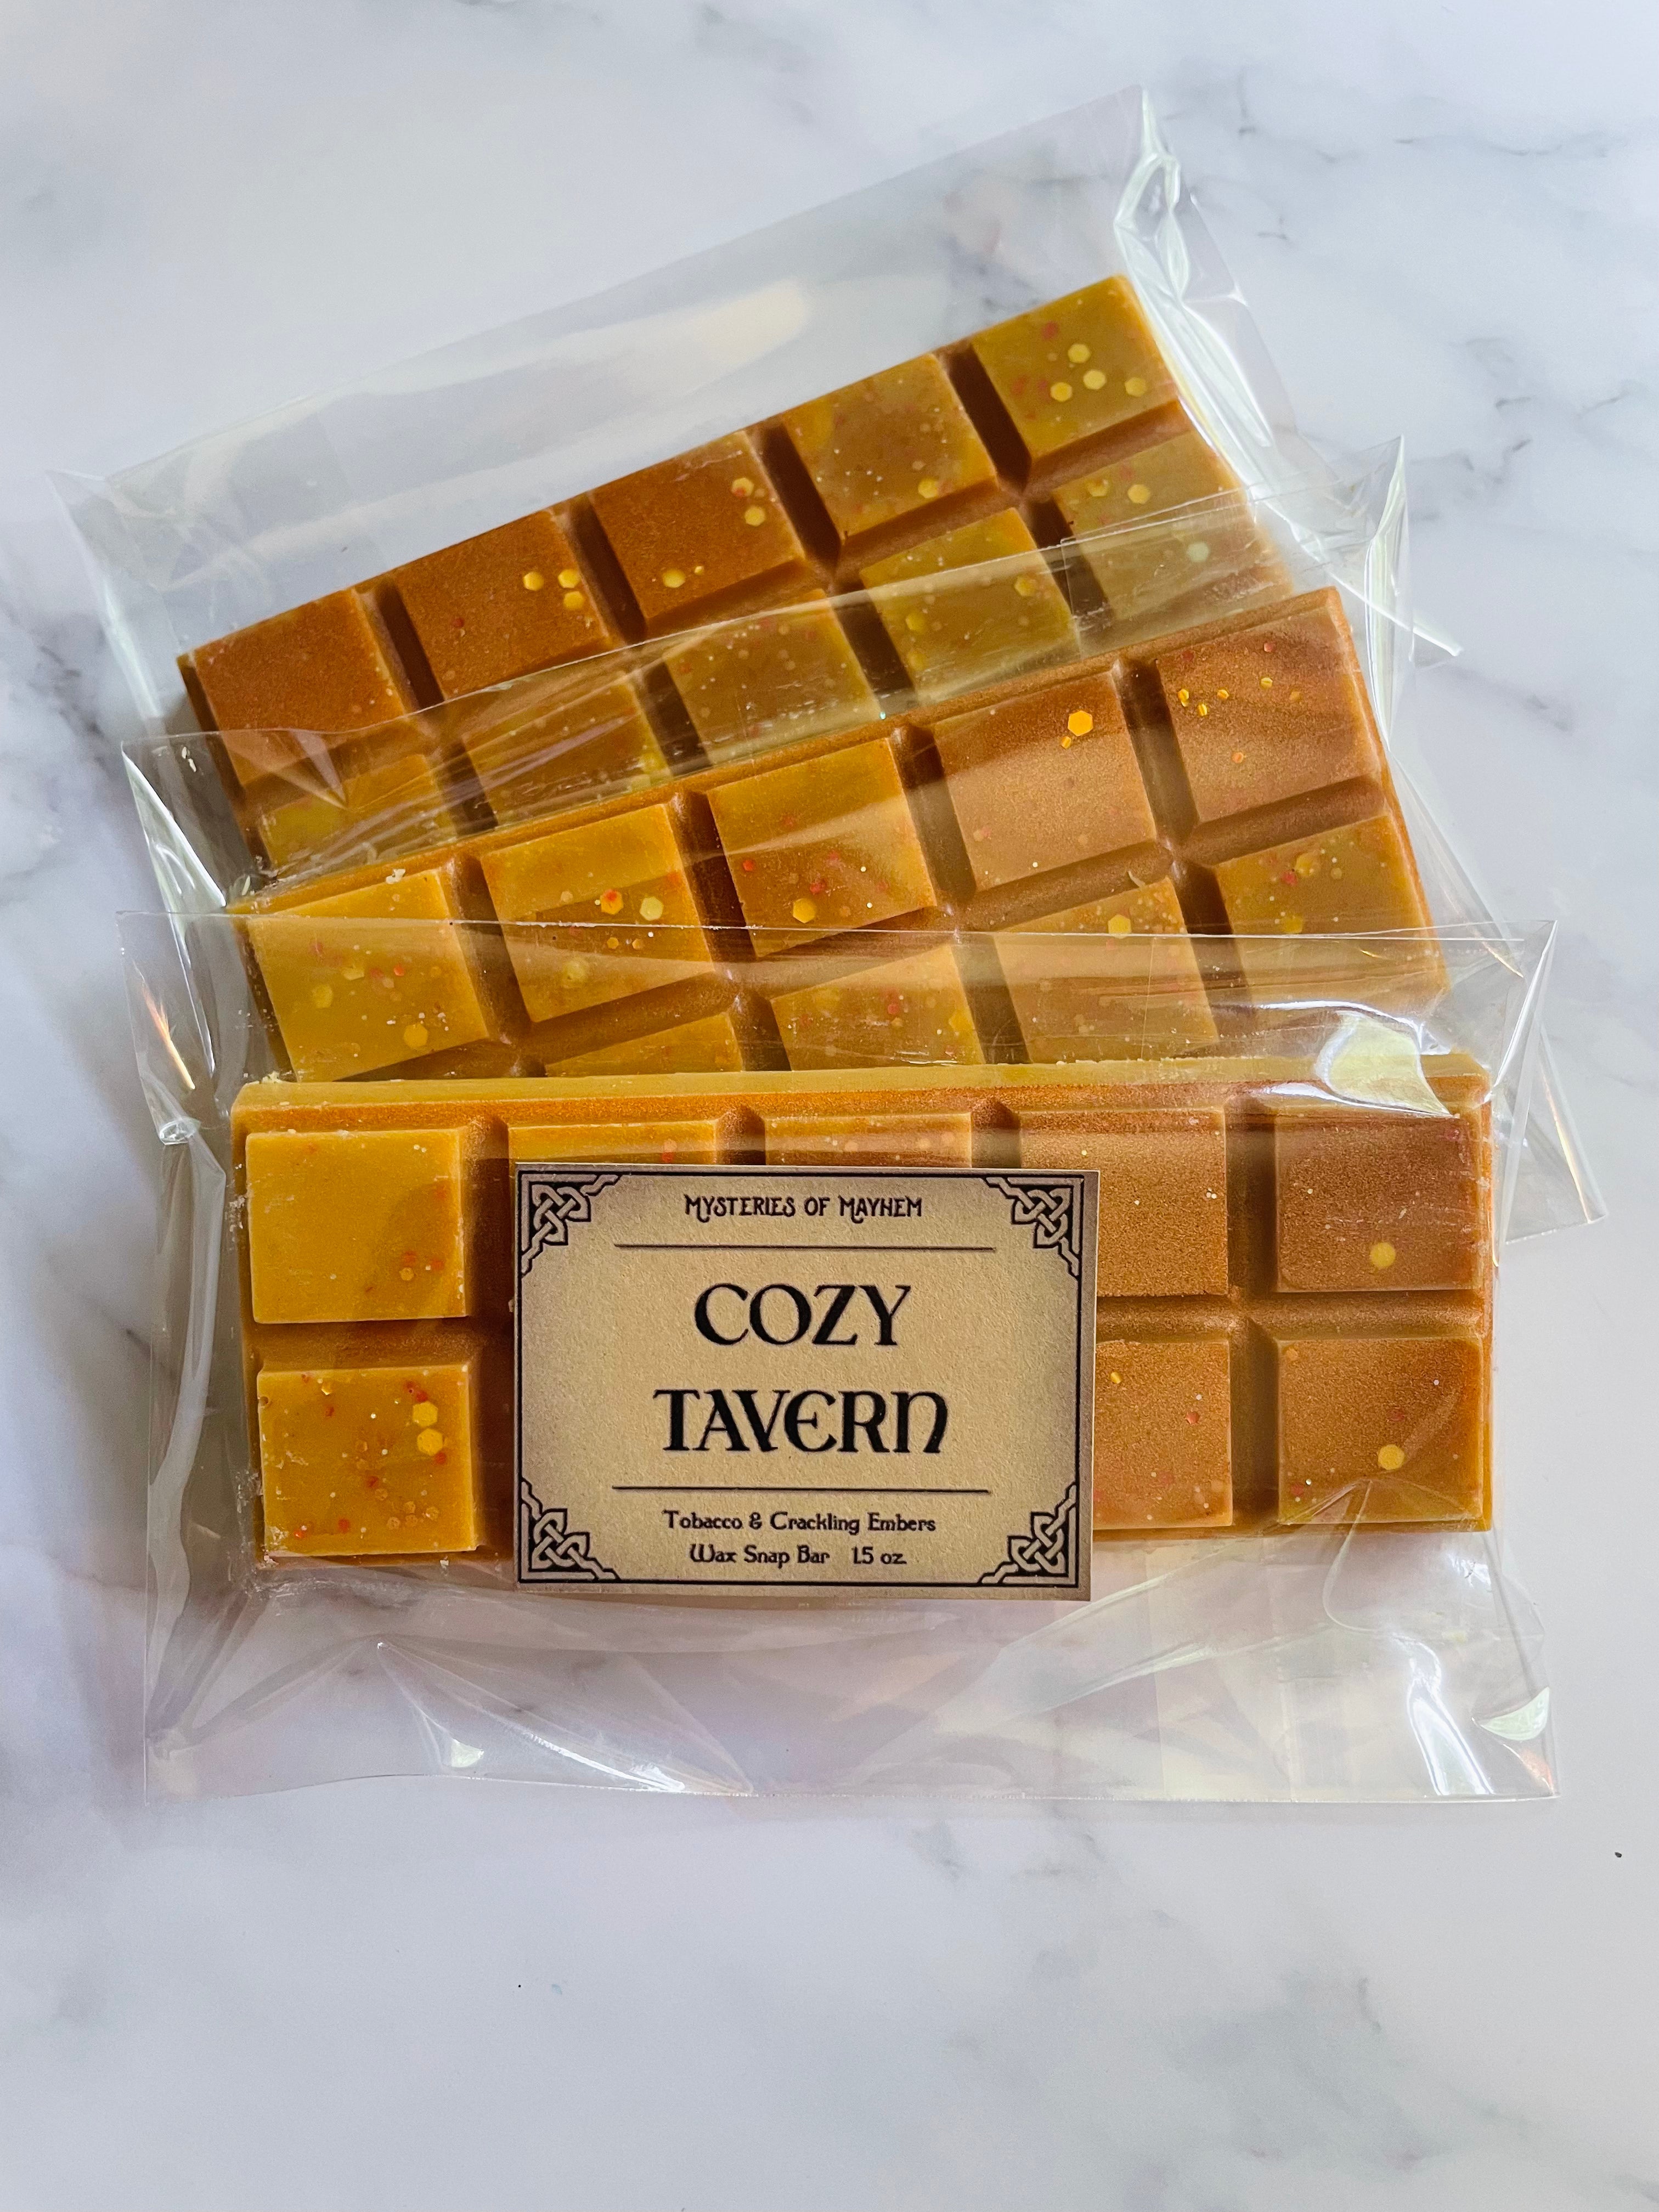 Cozy Tavern Wax Snap Bar - Tobacco & Crackling Embers Scented